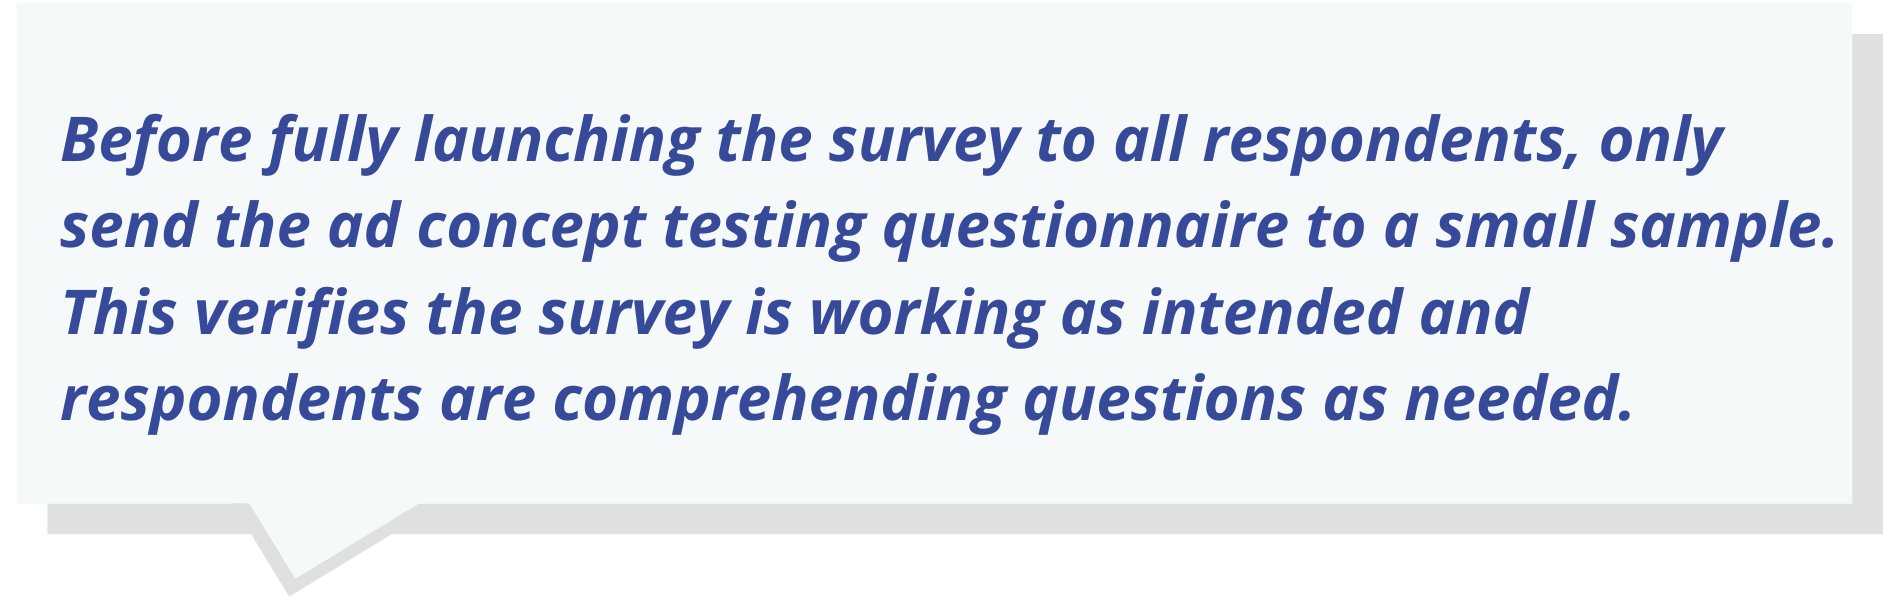 Before fully launching the survey to all respondents, only send the ad concept testing questionnaire to a small sample.   This verifies the survey is working as intended and respondents are comprehending questions as needed.